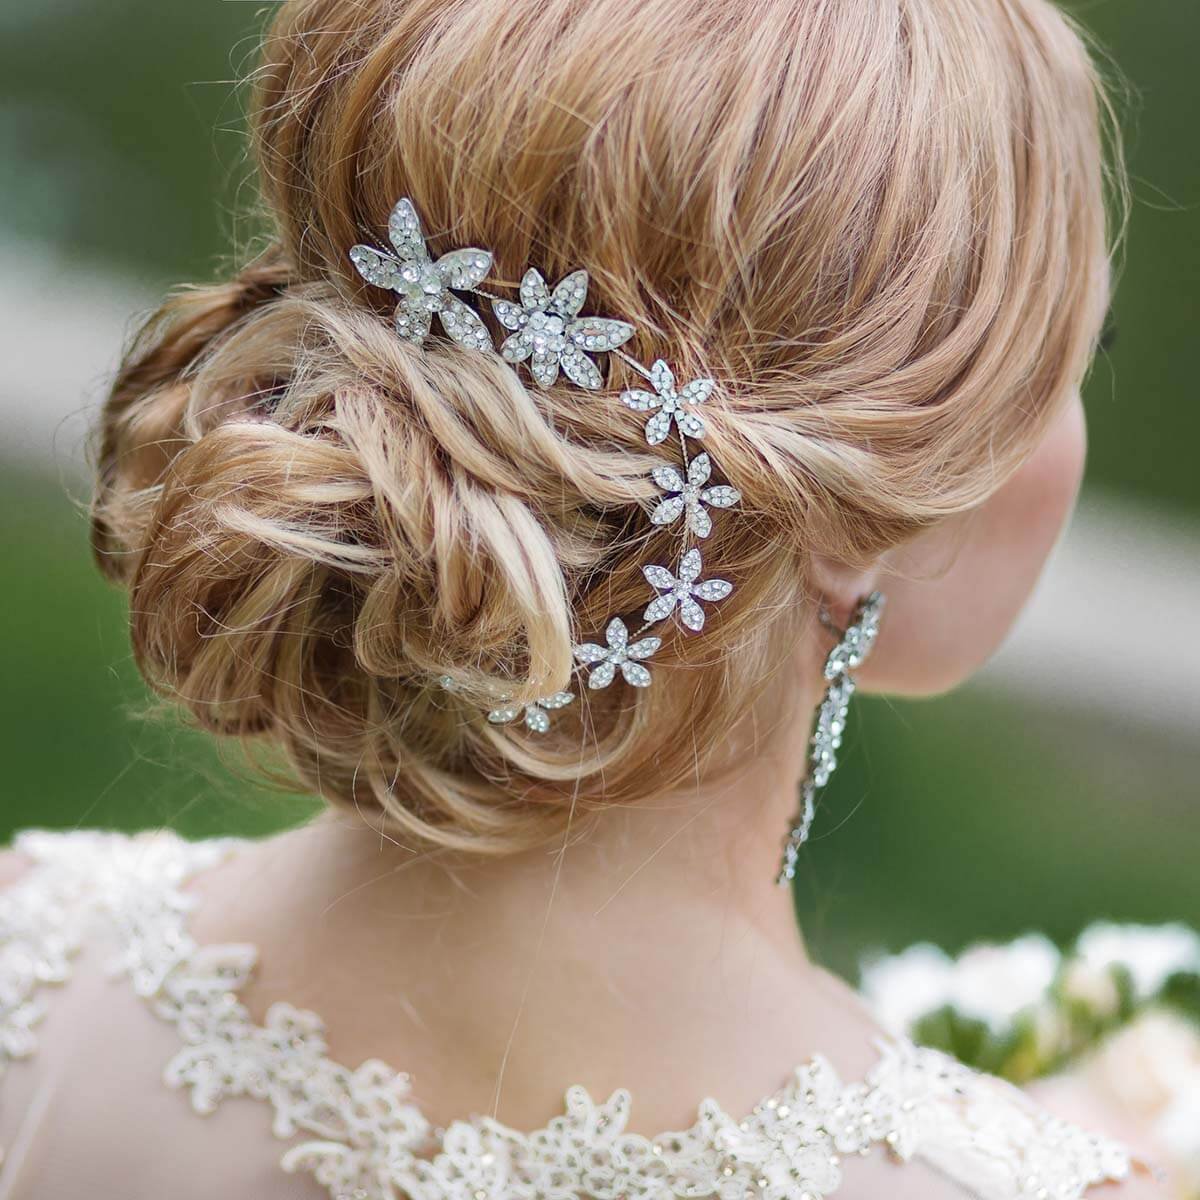 Hairstyle with flowers hair accessories for wedding